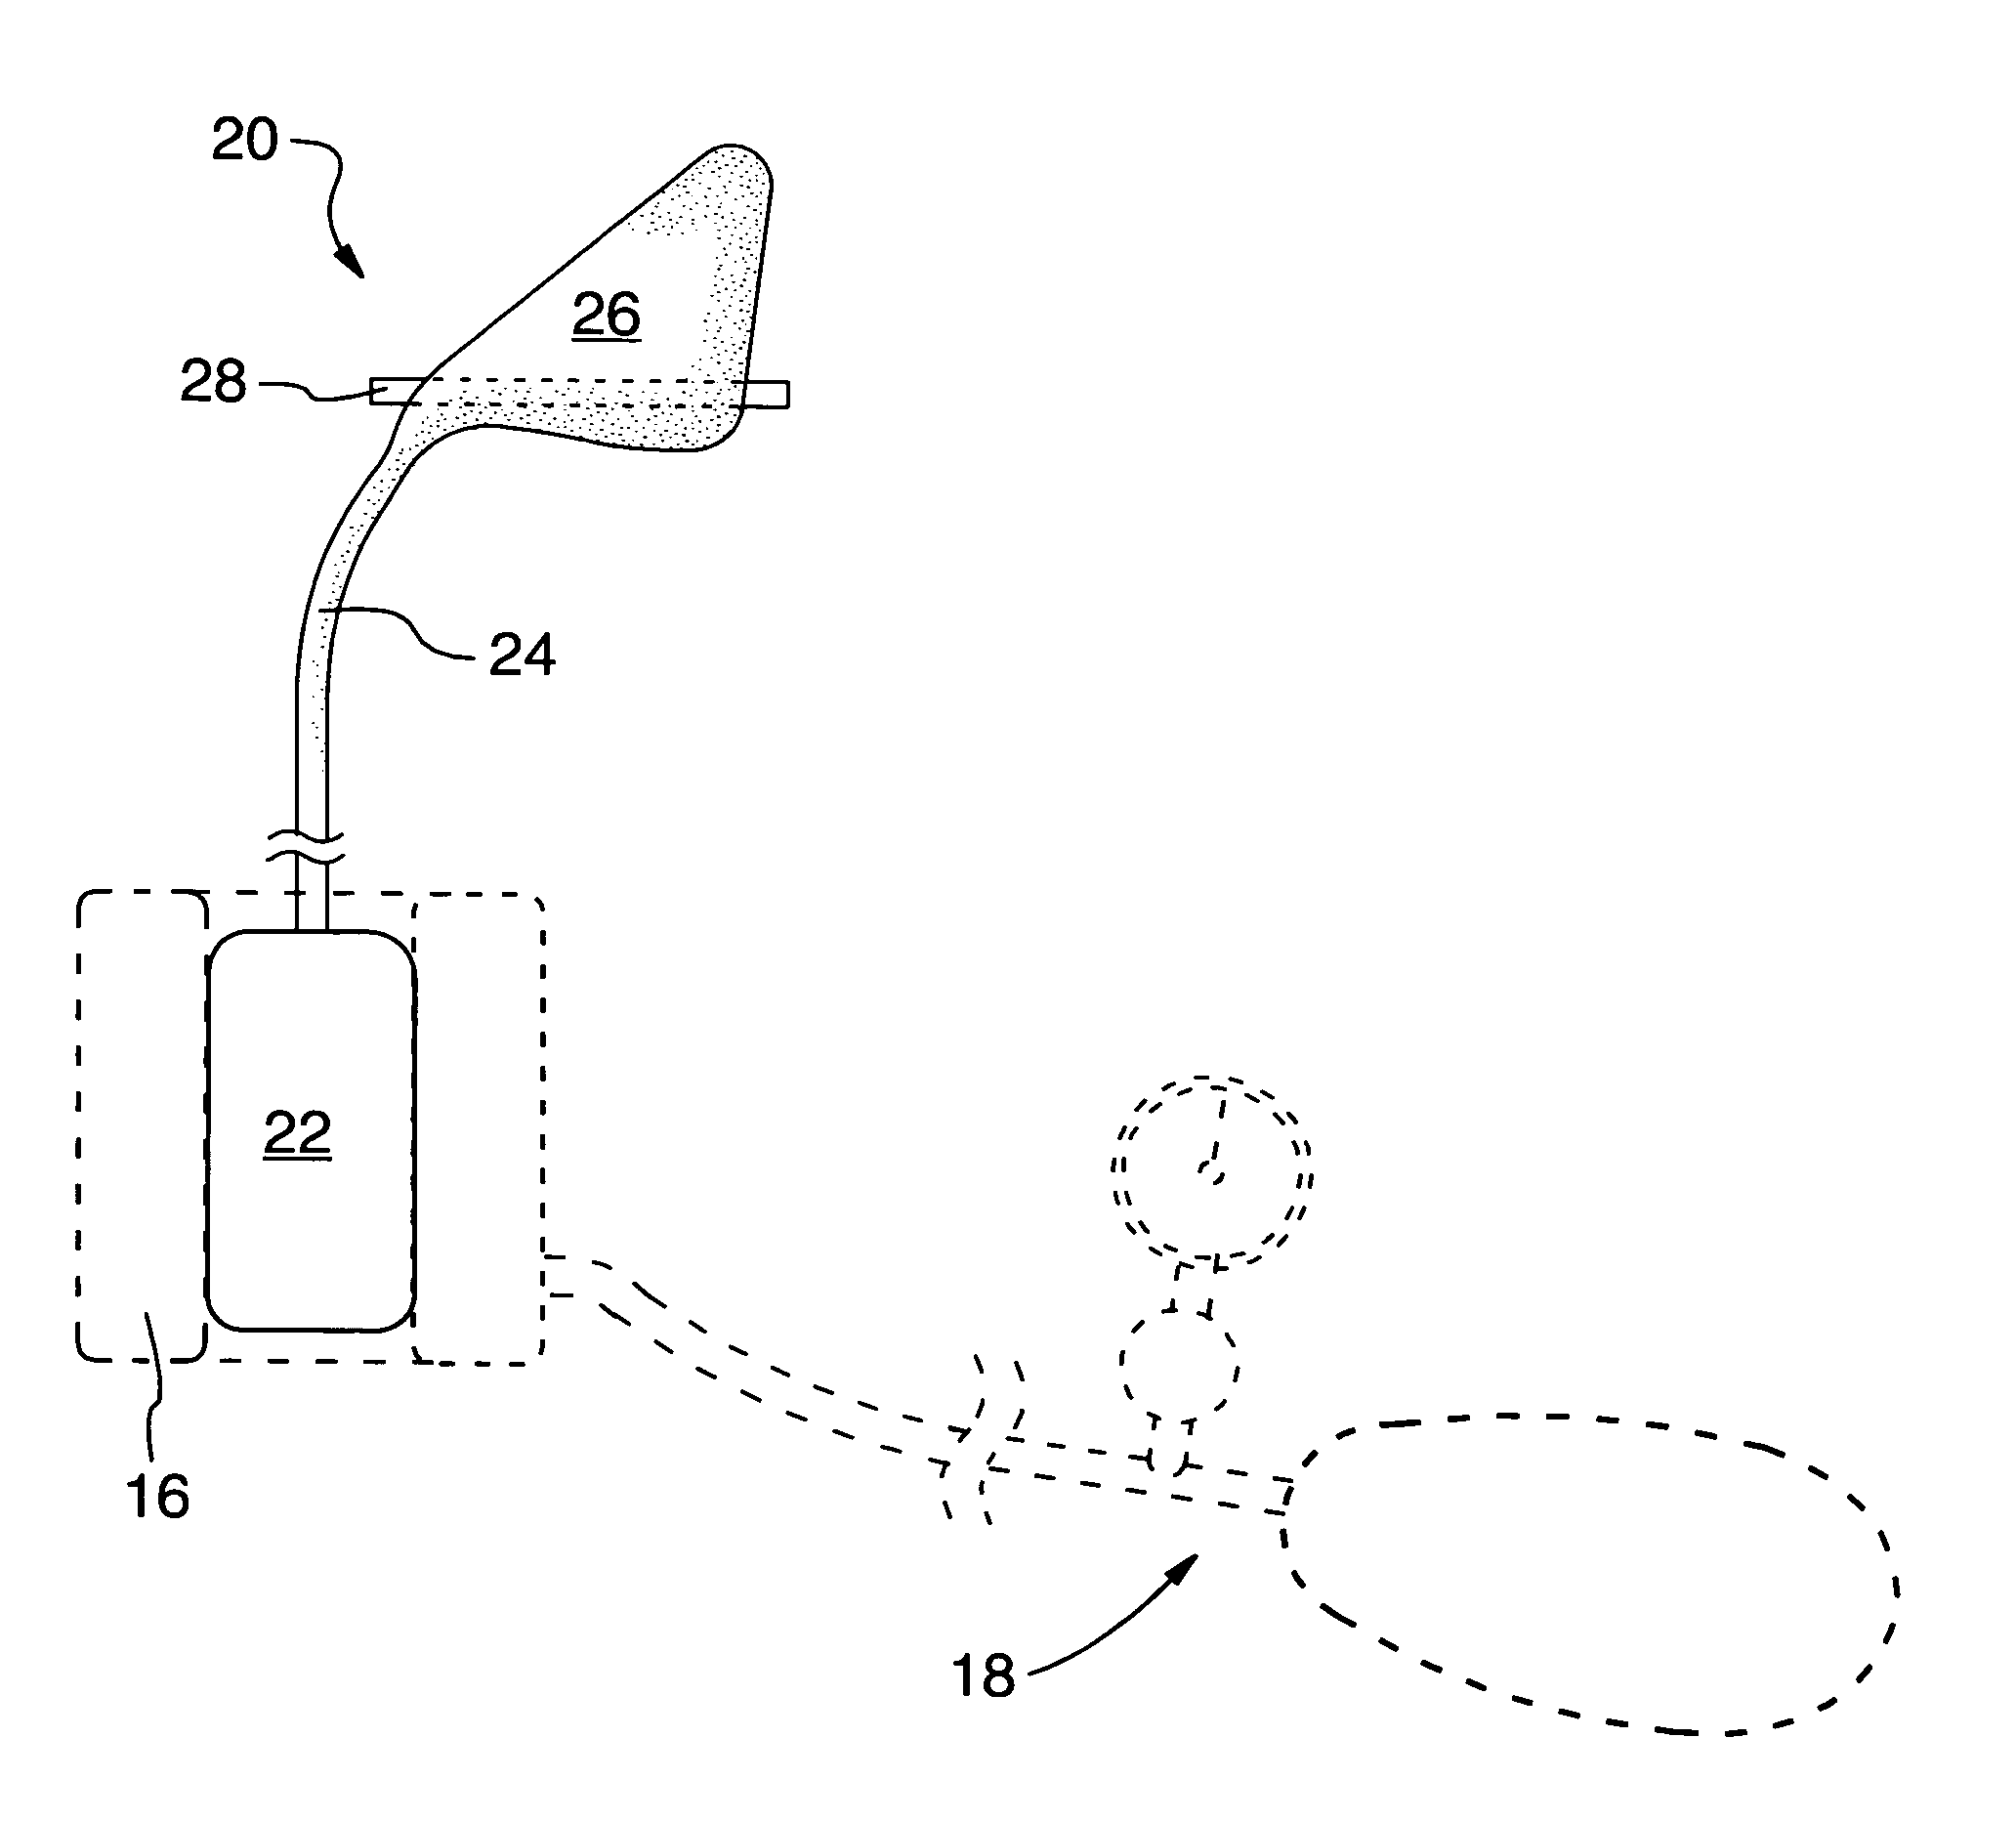 Epistaxis apparatus and method